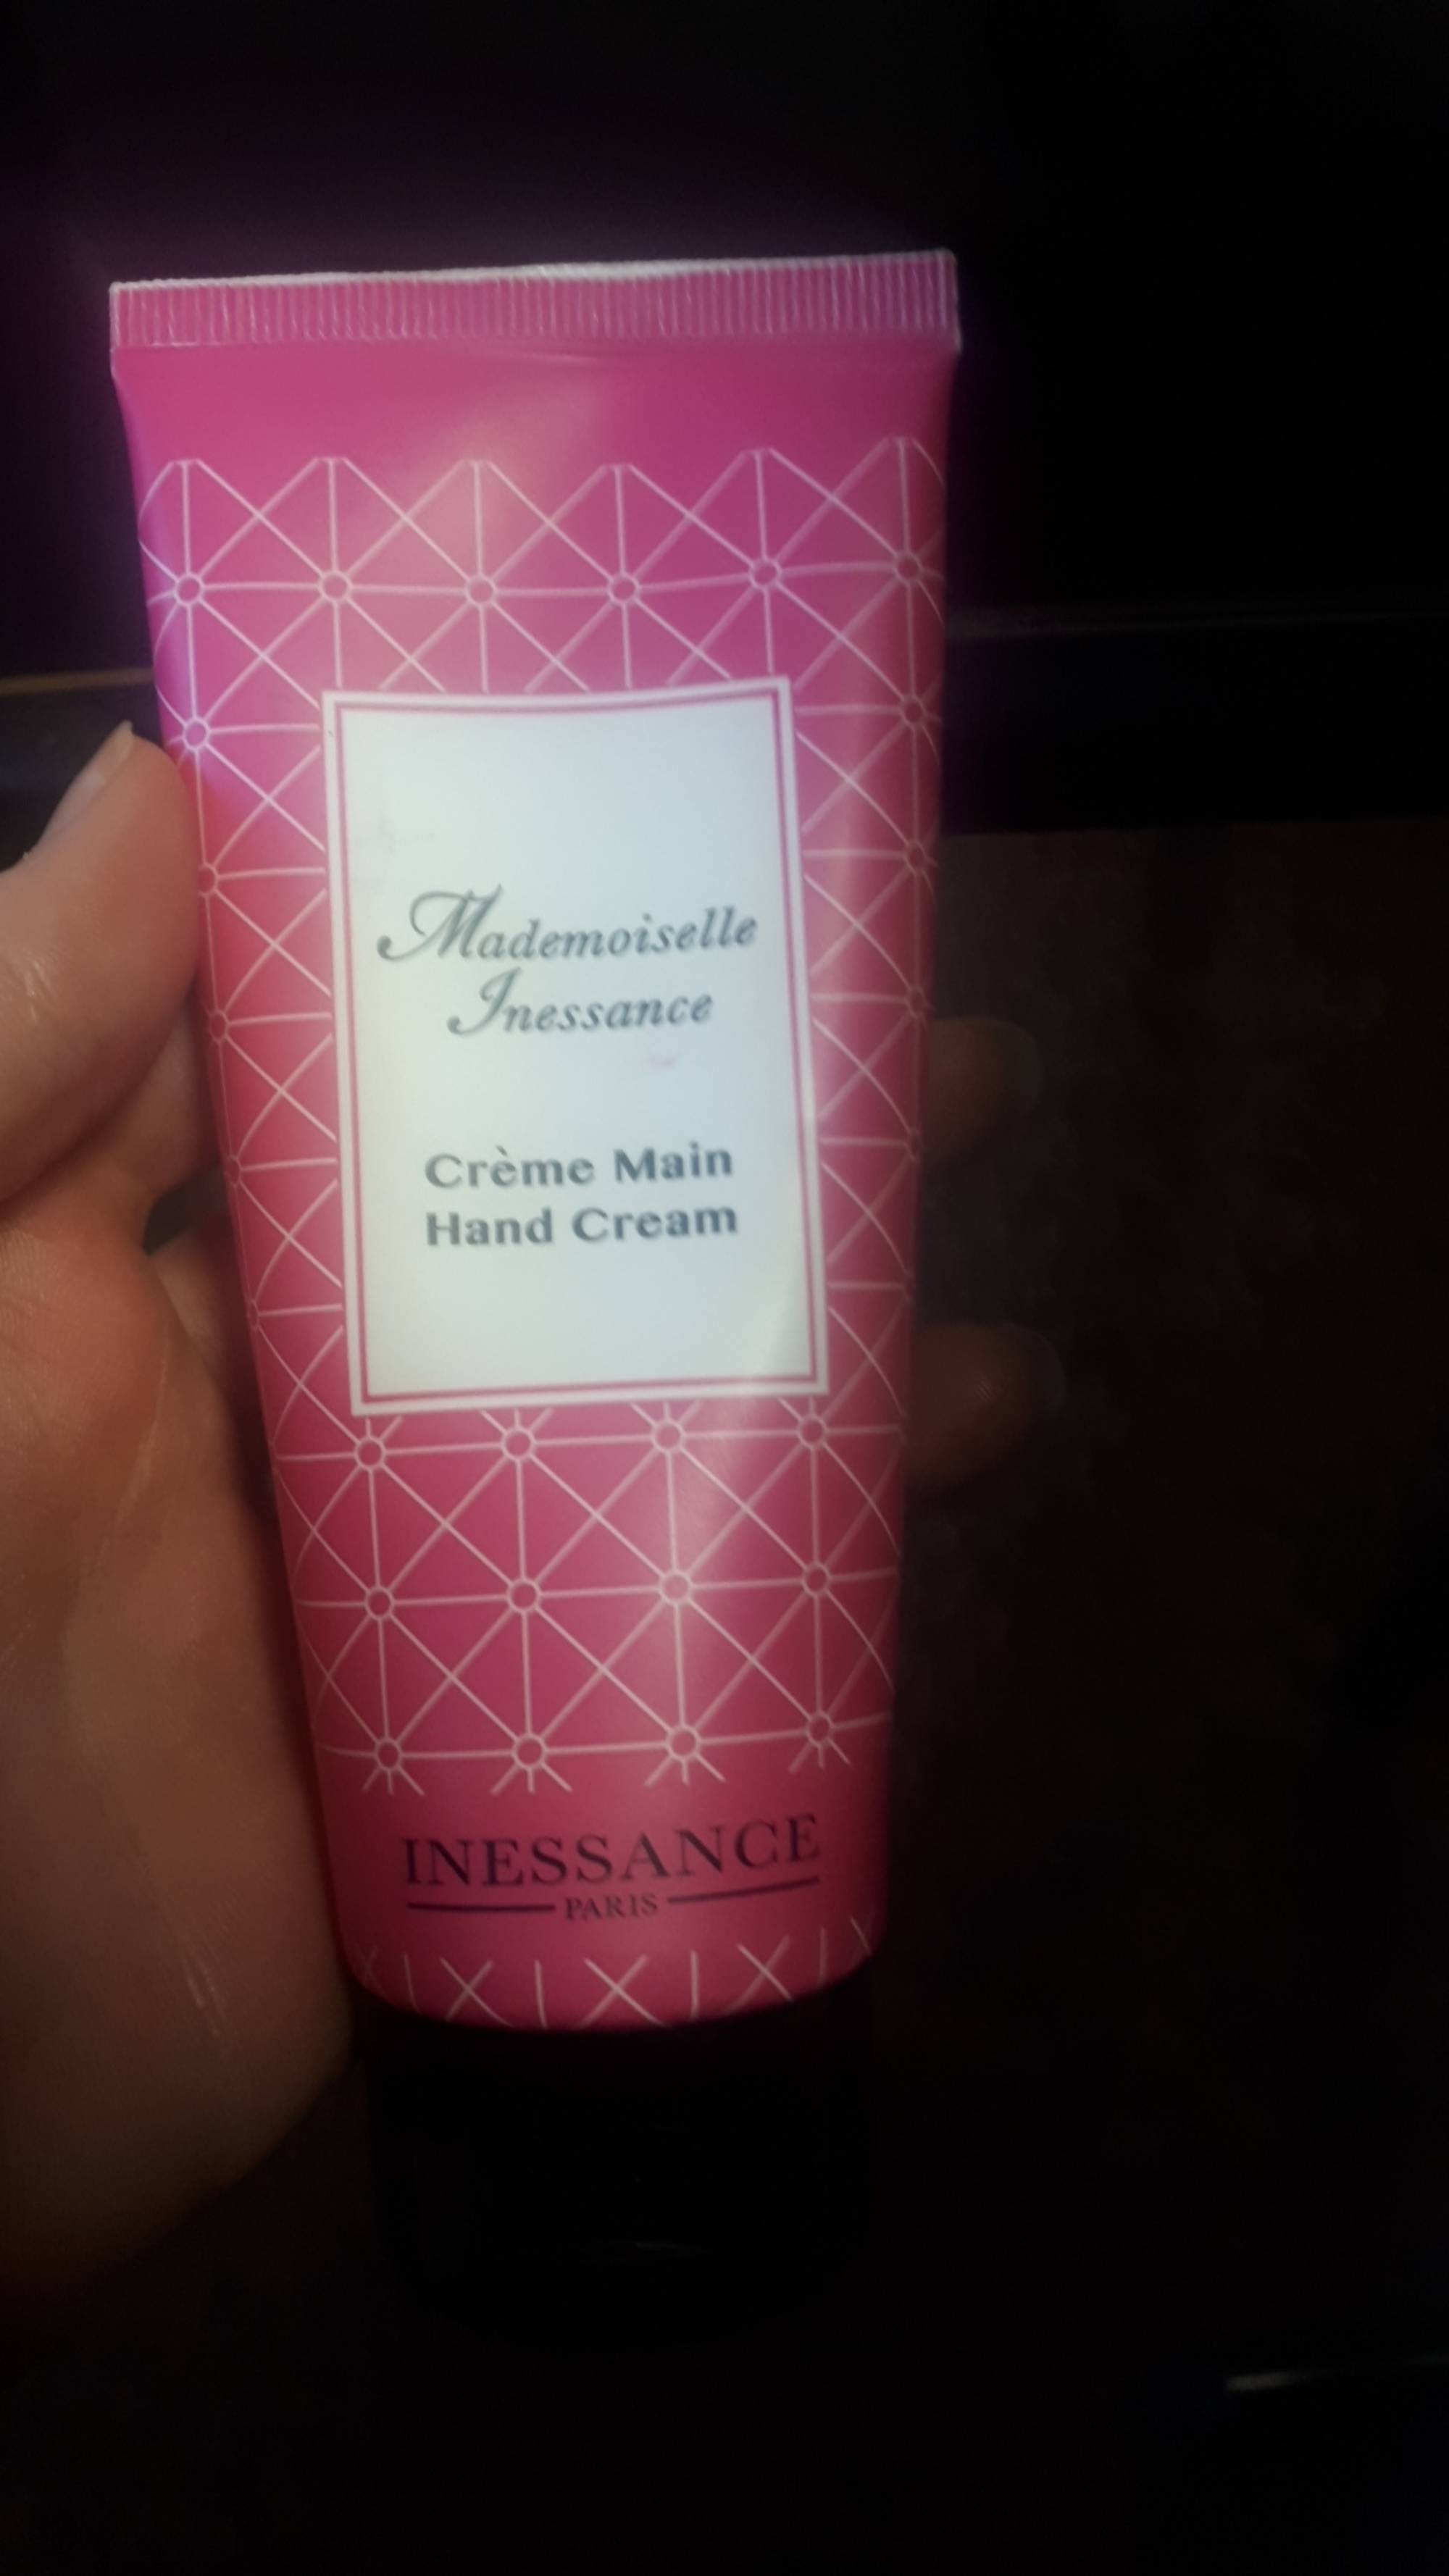 INESSANCE - Mademoiselle Inessance - Crème mains